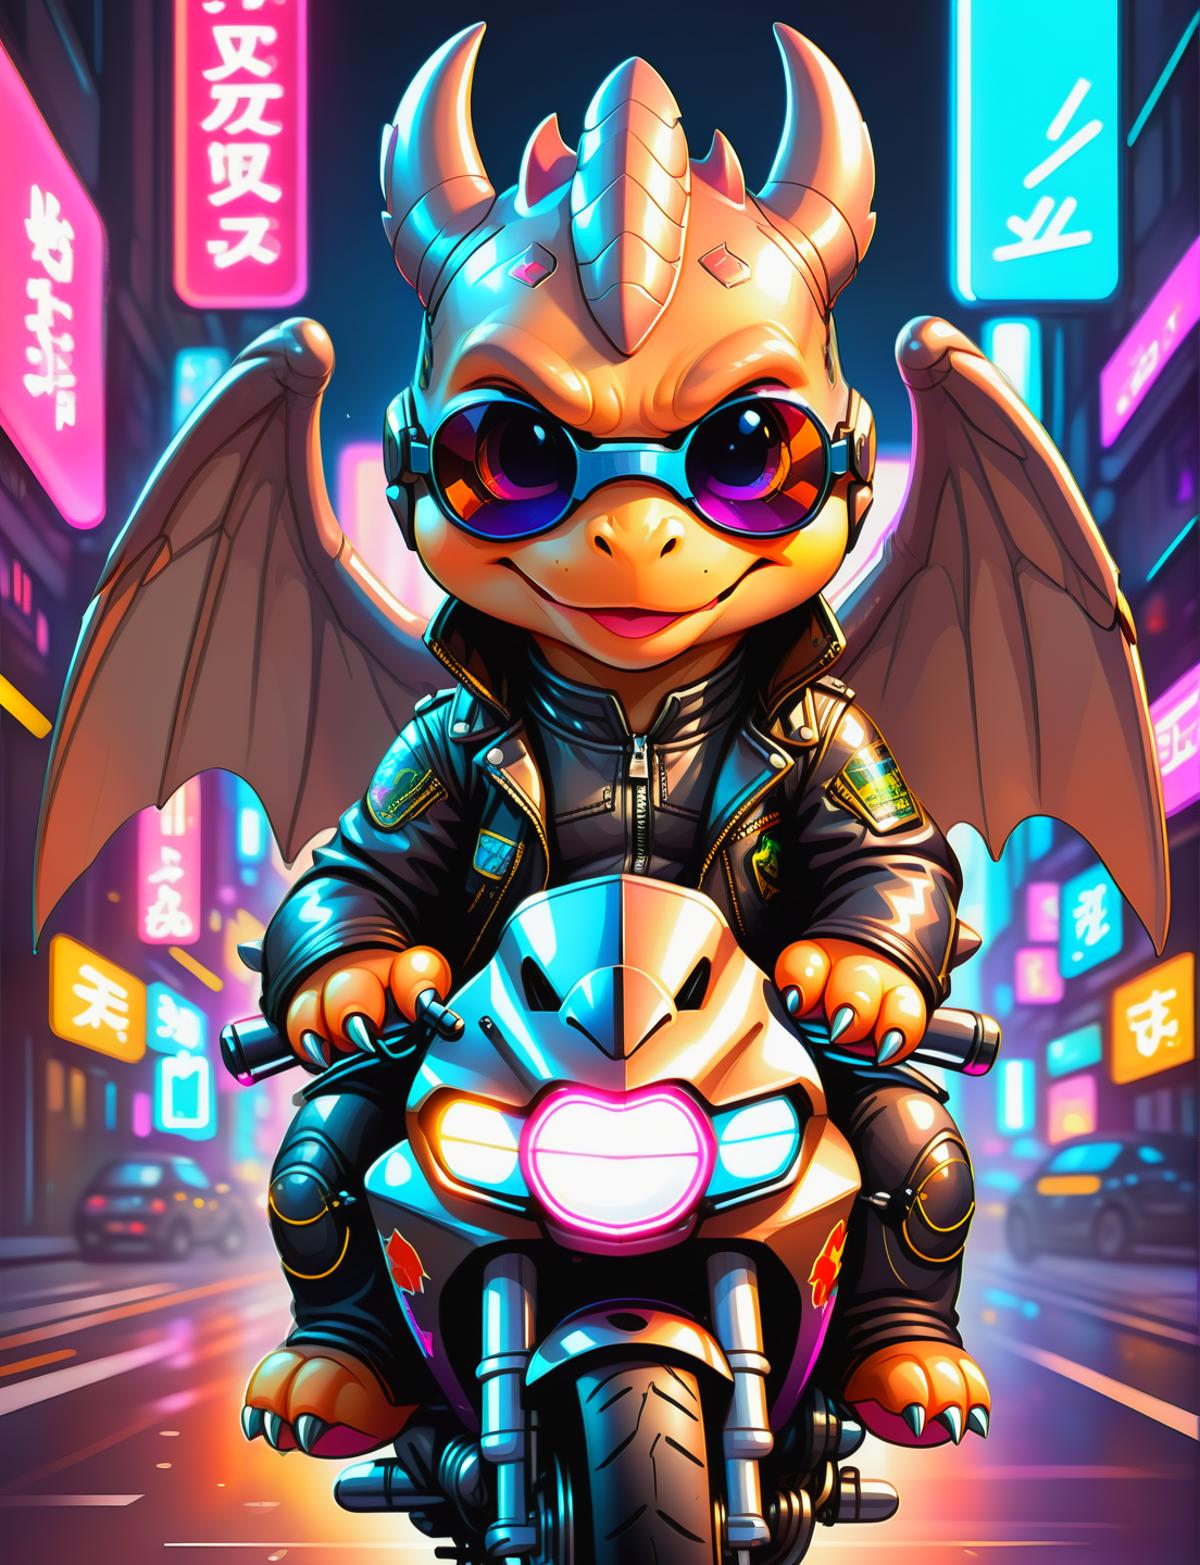 A dragon-like creature riding a motorcycle with sunglasses on.